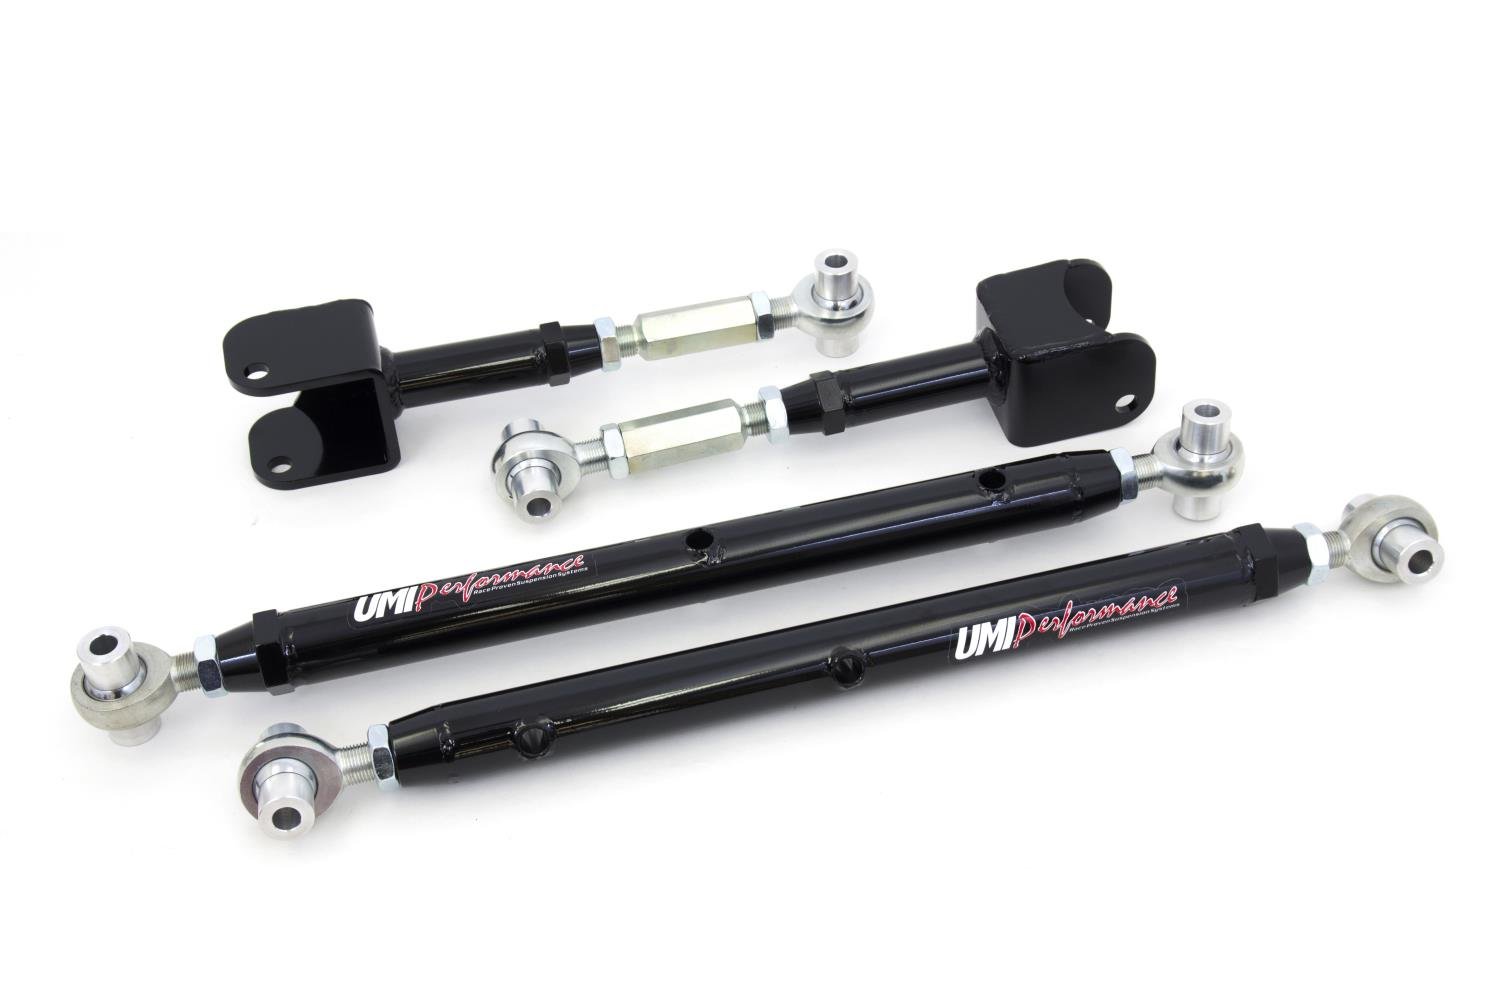 Double adjustable upper and lower rear trailing arms feature high strength rod ends for tough racing applications.